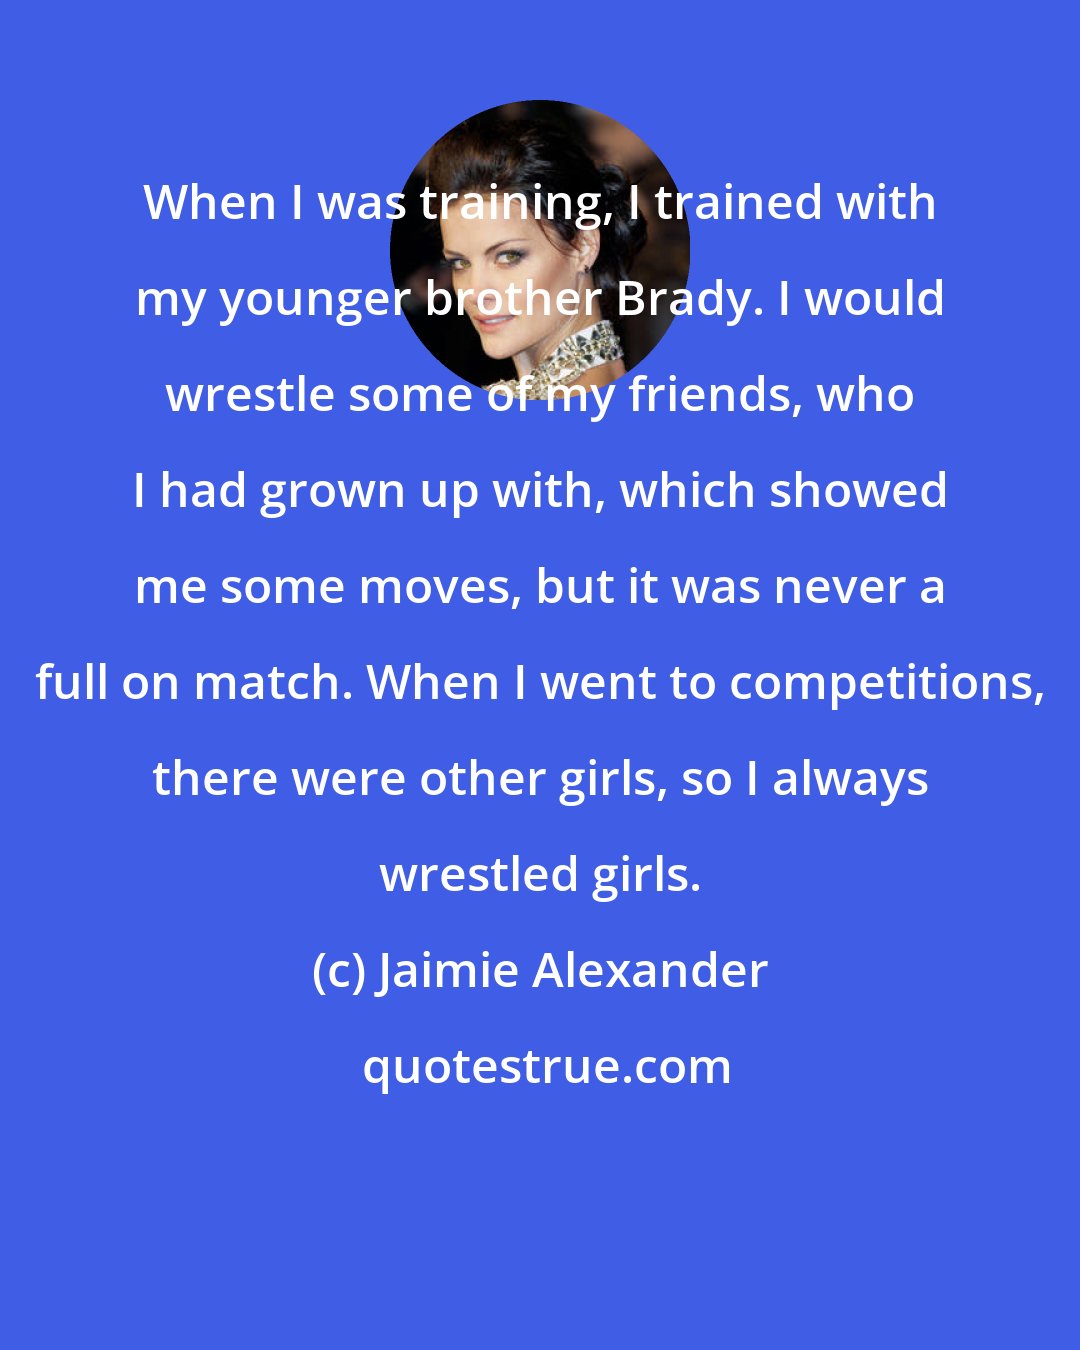 Jaimie Alexander: When I was training, I trained with my younger brother Brady. I would wrestle some of my friends, who I had grown up with, which showed me some moves, but it was never a full on match. When I went to competitions, there were other girls, so I always wrestled girls.